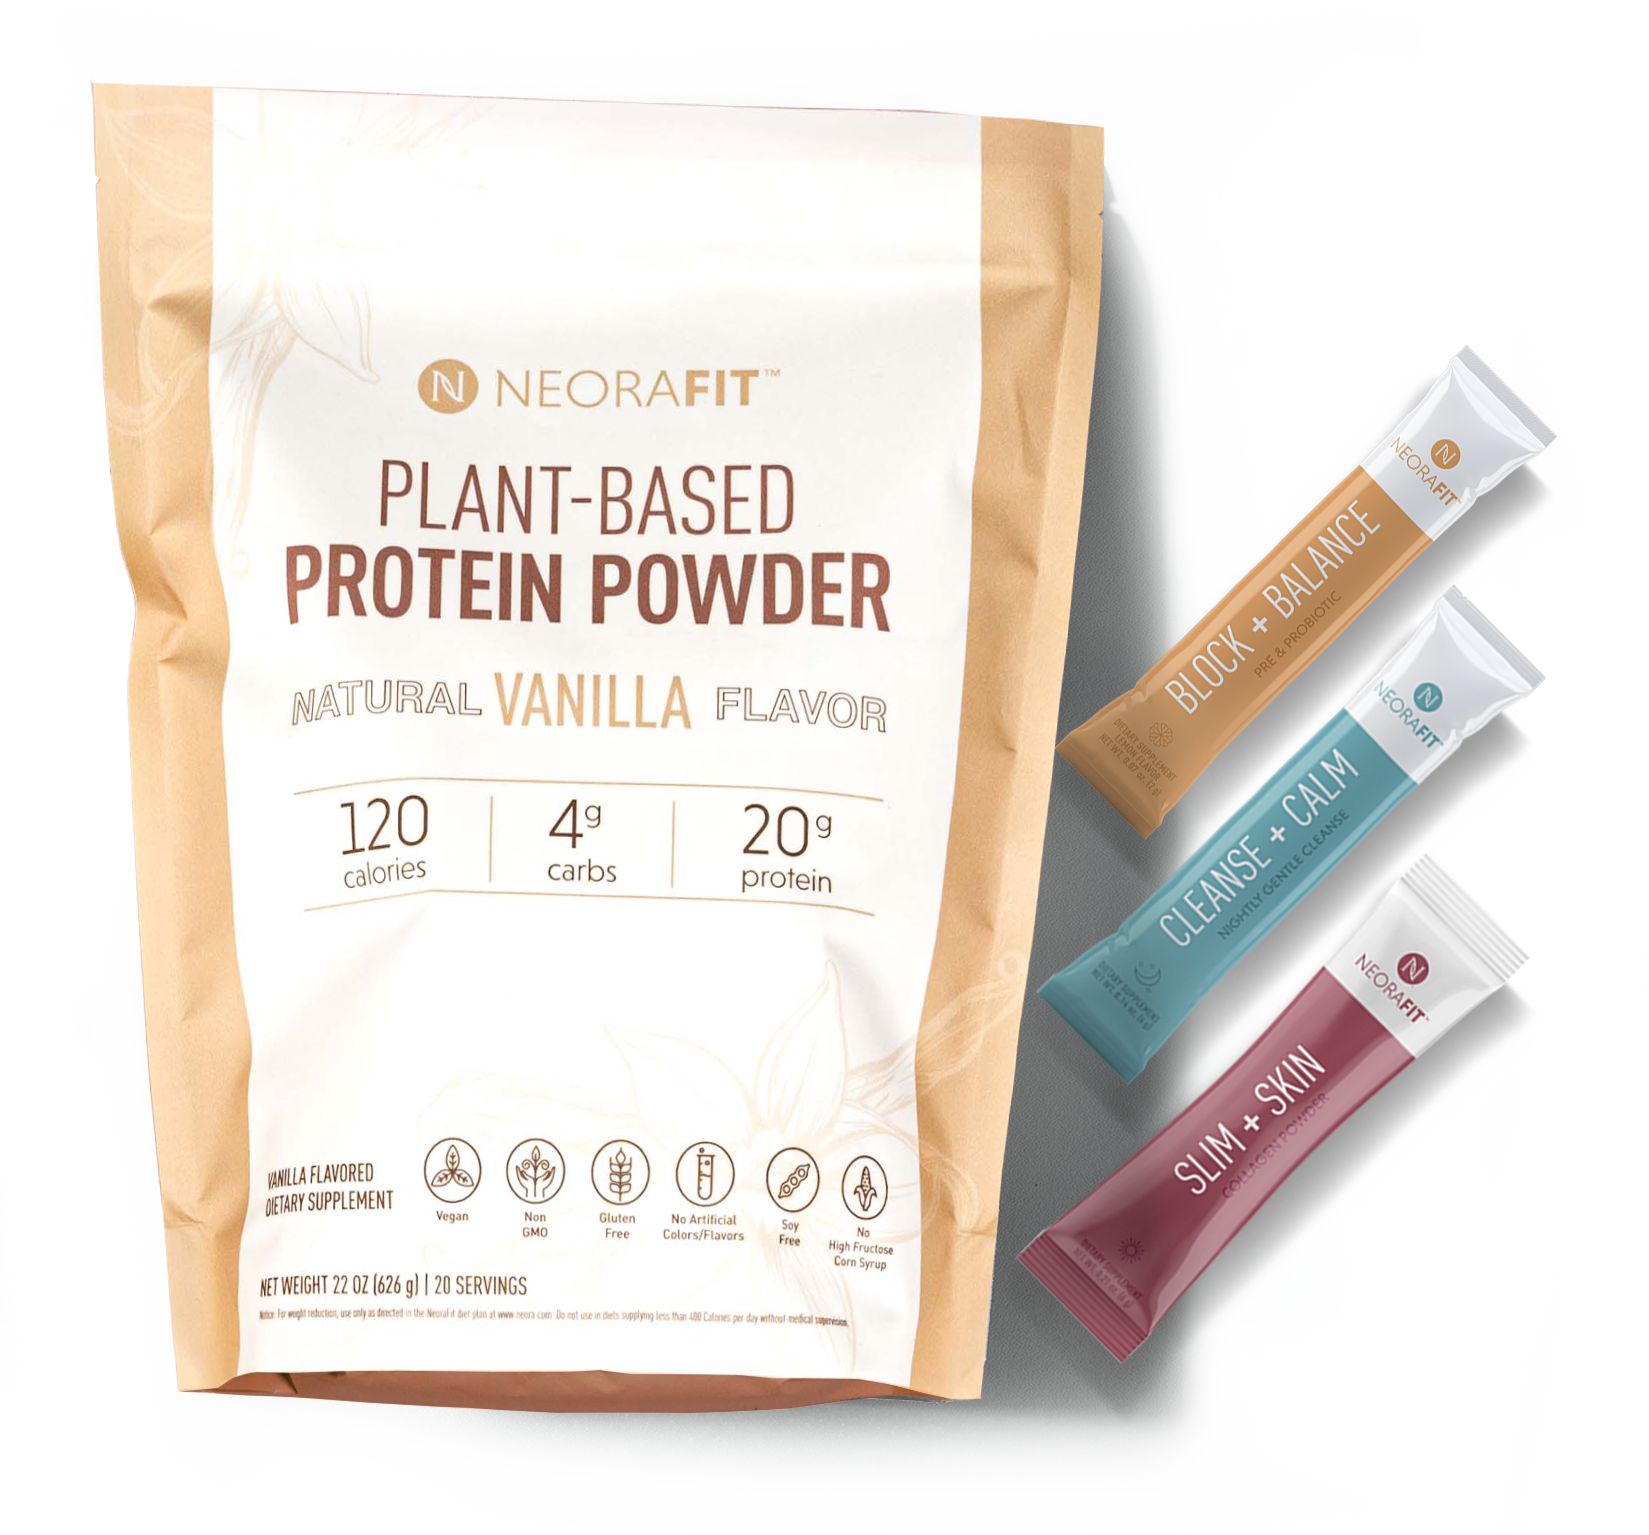 Neora Plant-Based Protein Powder bag paired with sachets of Block + Balance, Cleanse + Calm and Slim + Skin from NeoraFit’s 3-part daily support system